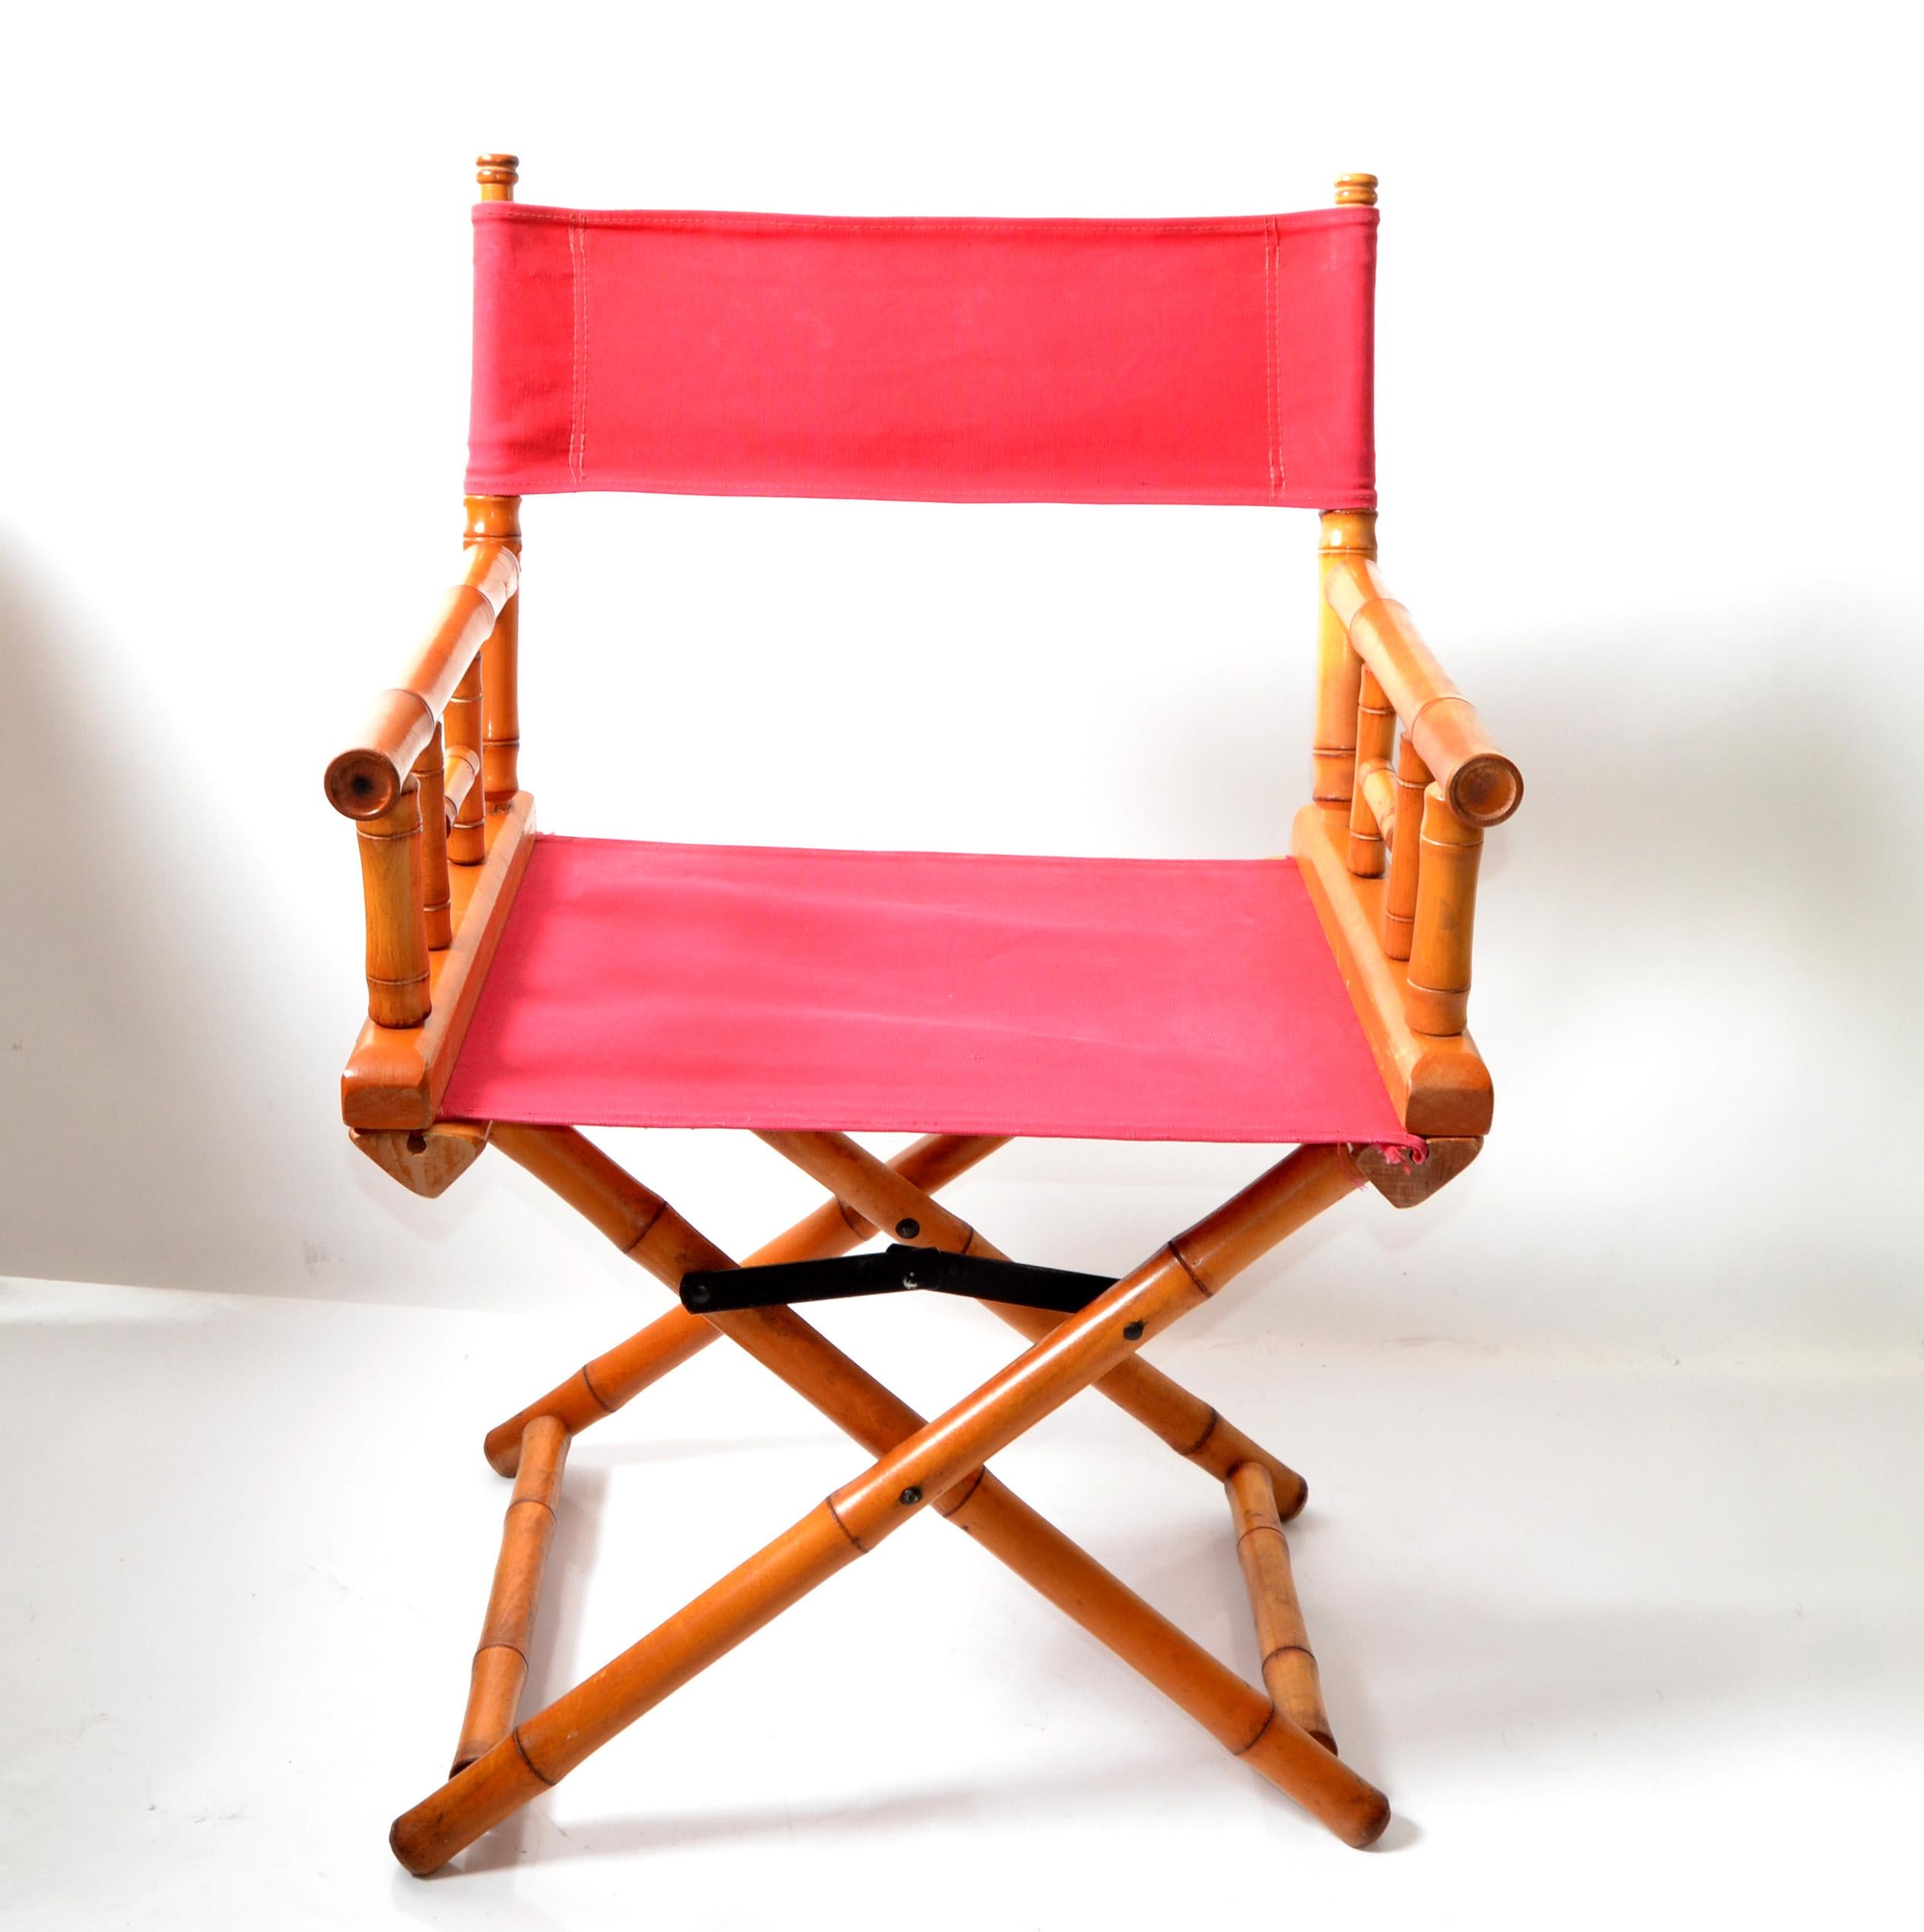 Mid-Century Modern coral red cottan canvas and bamboo wood folding director chair with canvas sling seat and back rests. 
Attributed to Telescope Furniture Company, circa 1970's, Made in the USA, unsigned.
The chair is in very good, original